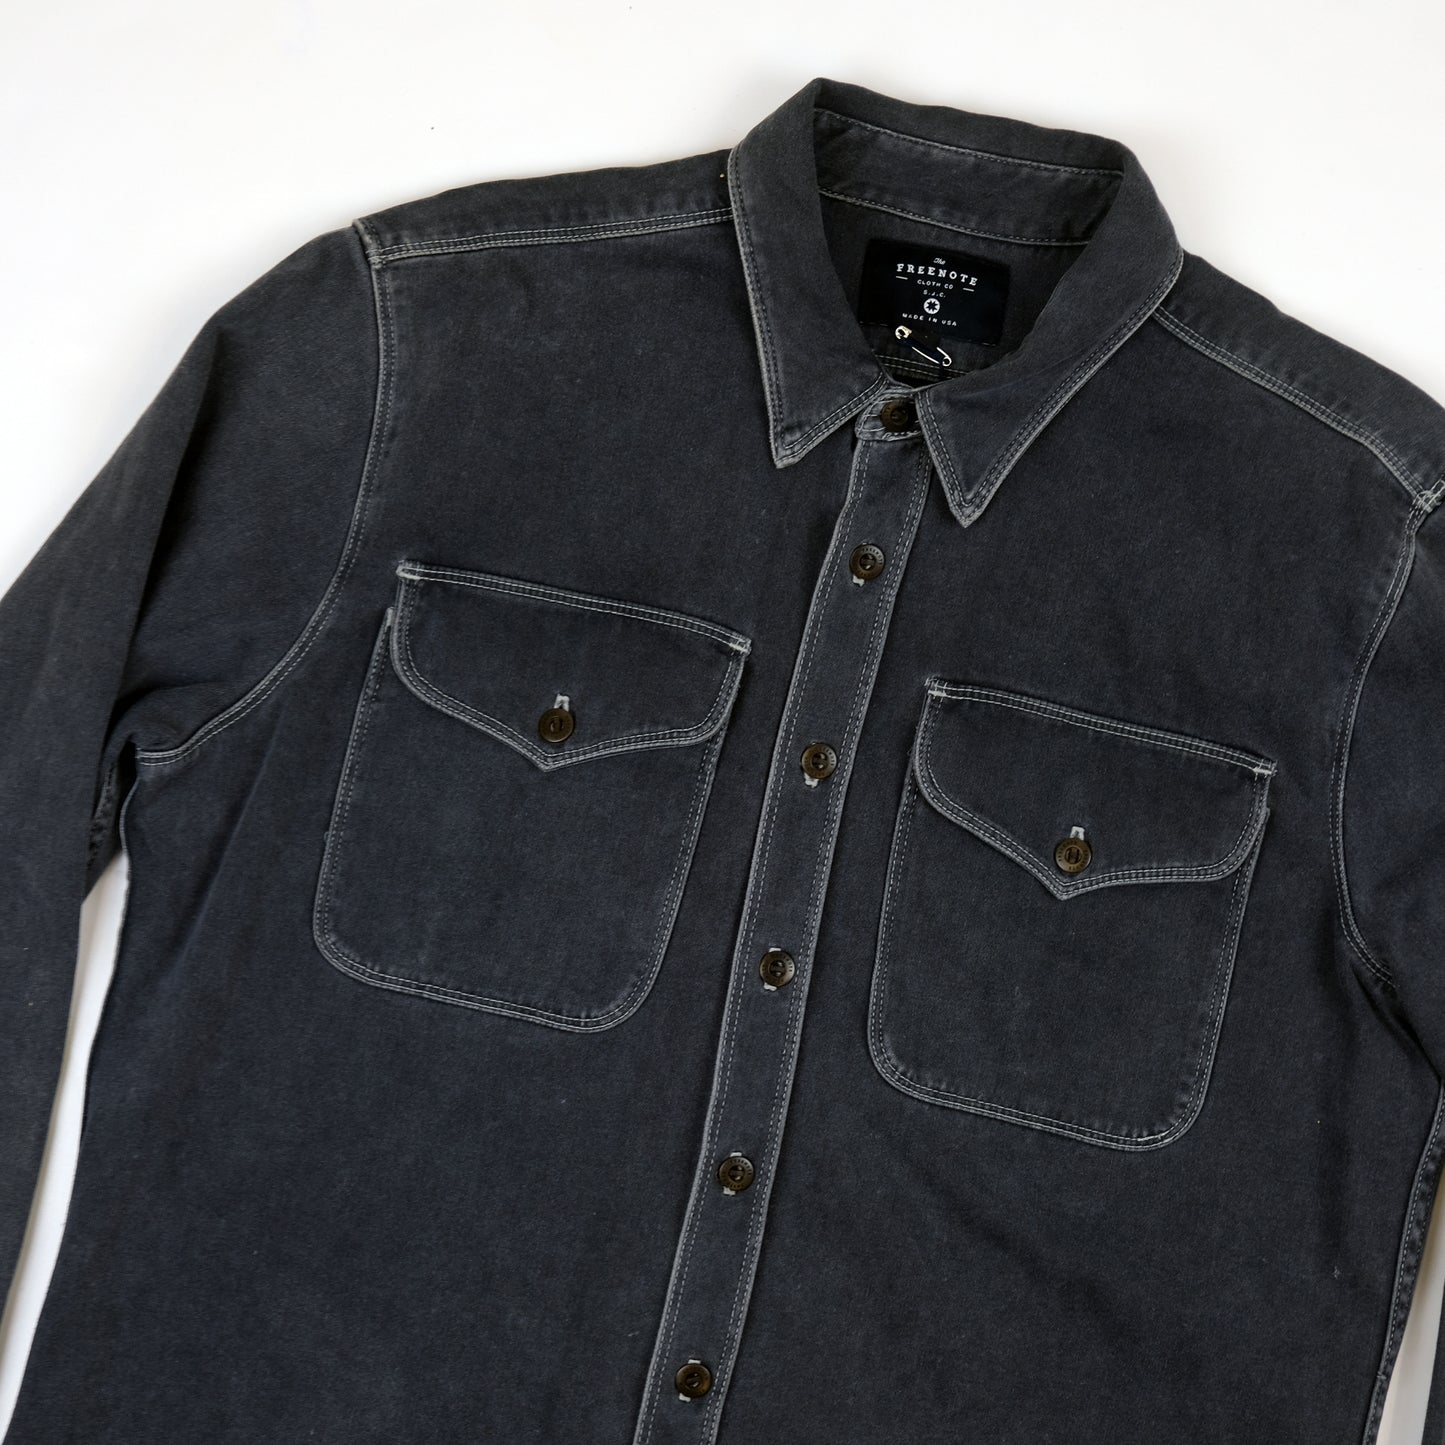 #PH-P1020L Freenote Cloth Utility Shirt in Charcoal, Size Large